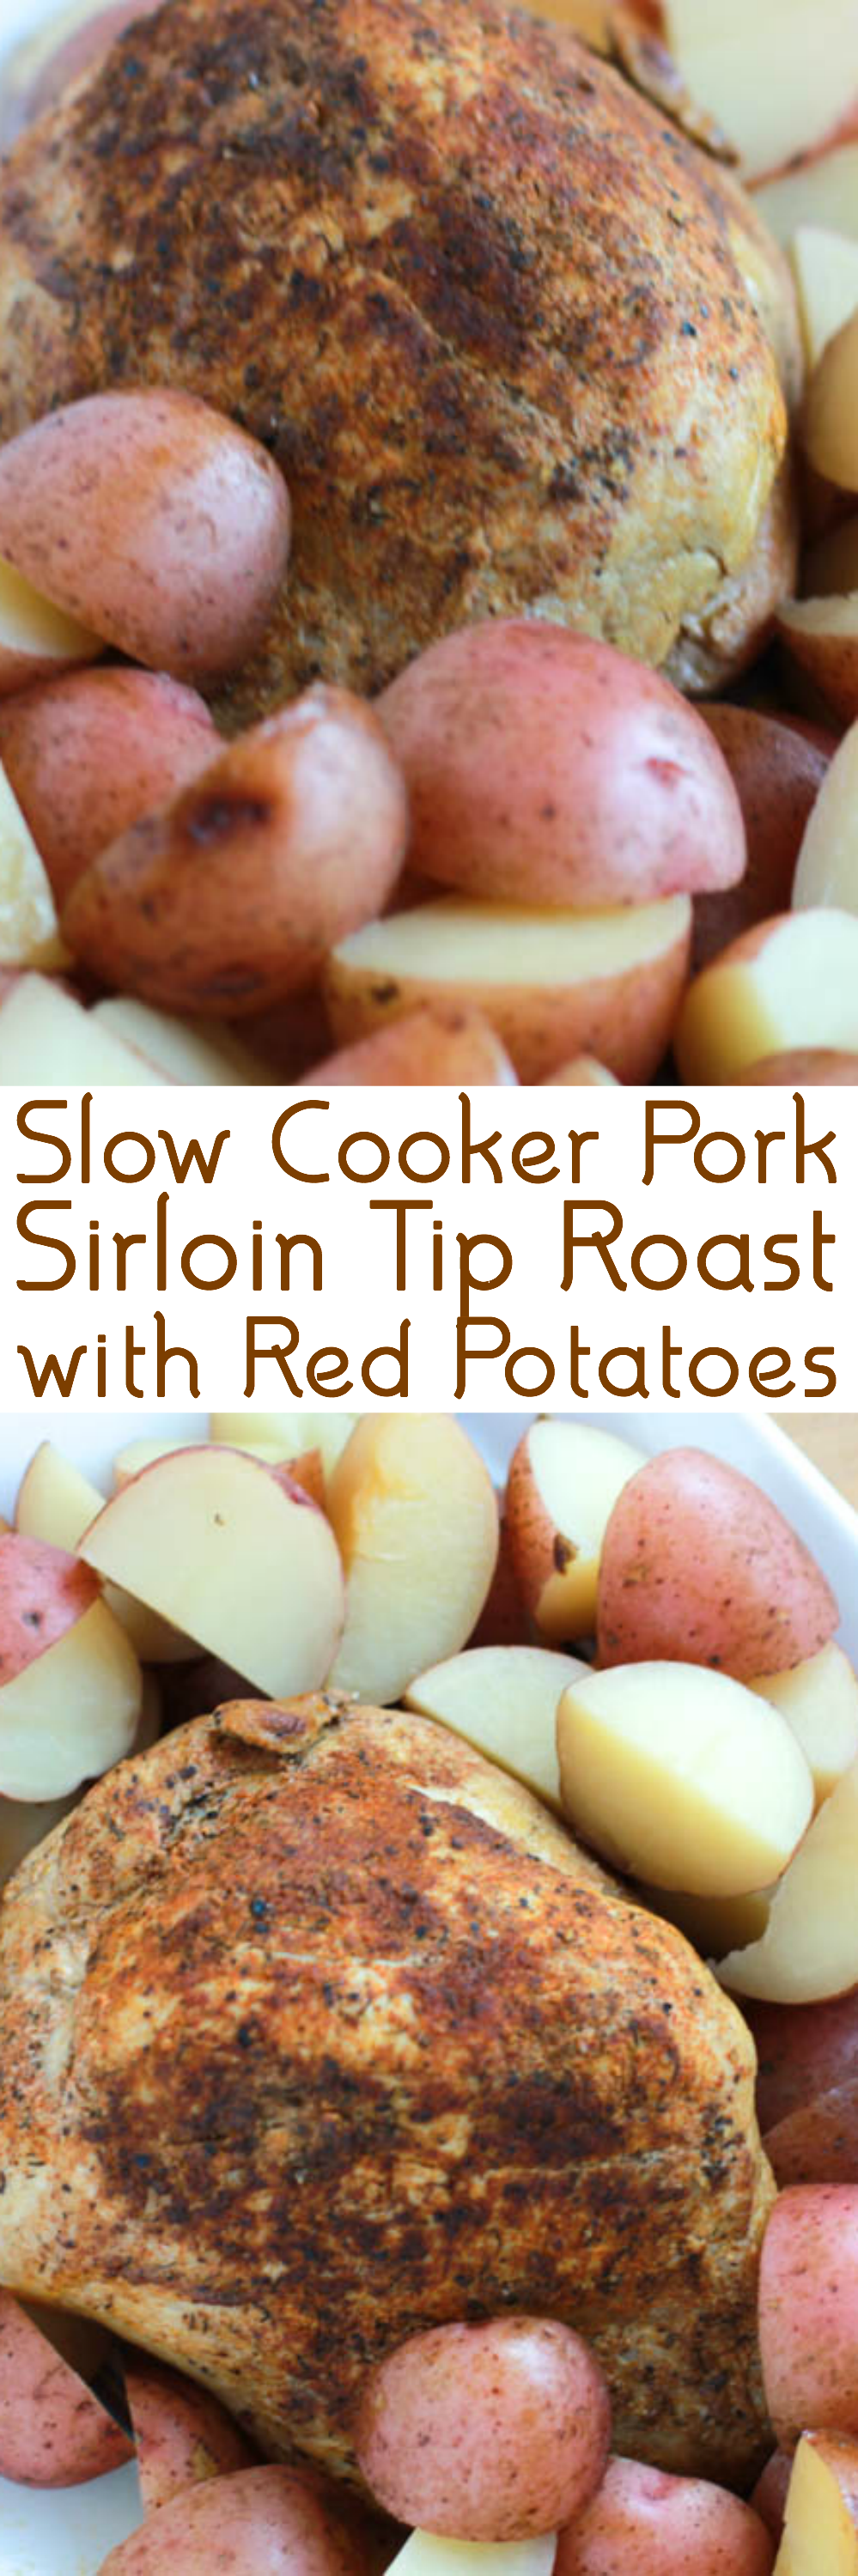 A beautiful array of Slow Cooker Pork Sirloin Tip Roast with Red Potatoes on a plate